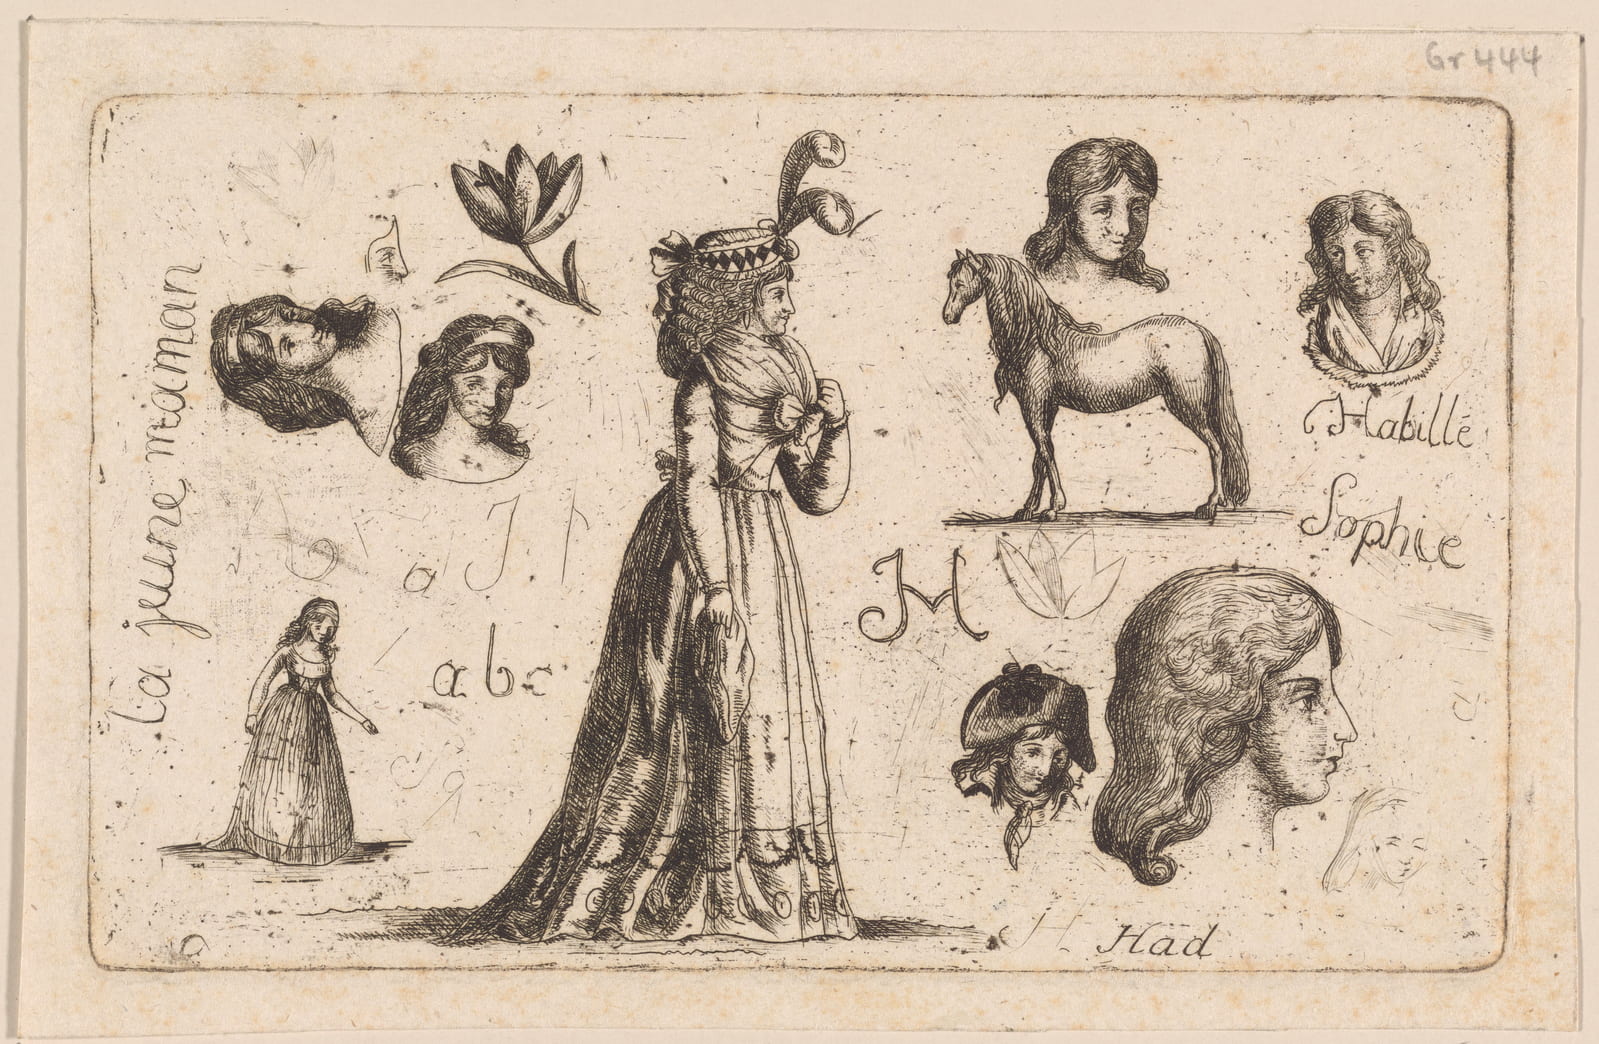 Sophie of Saxe-Coburg-Saalfeld (1778-1835) “A sheet of sketches and studies …” 1795. The Miriam and Ira D. Wallach Division of Art, Prints and Photographs: Print Collection, The New York Public Library.